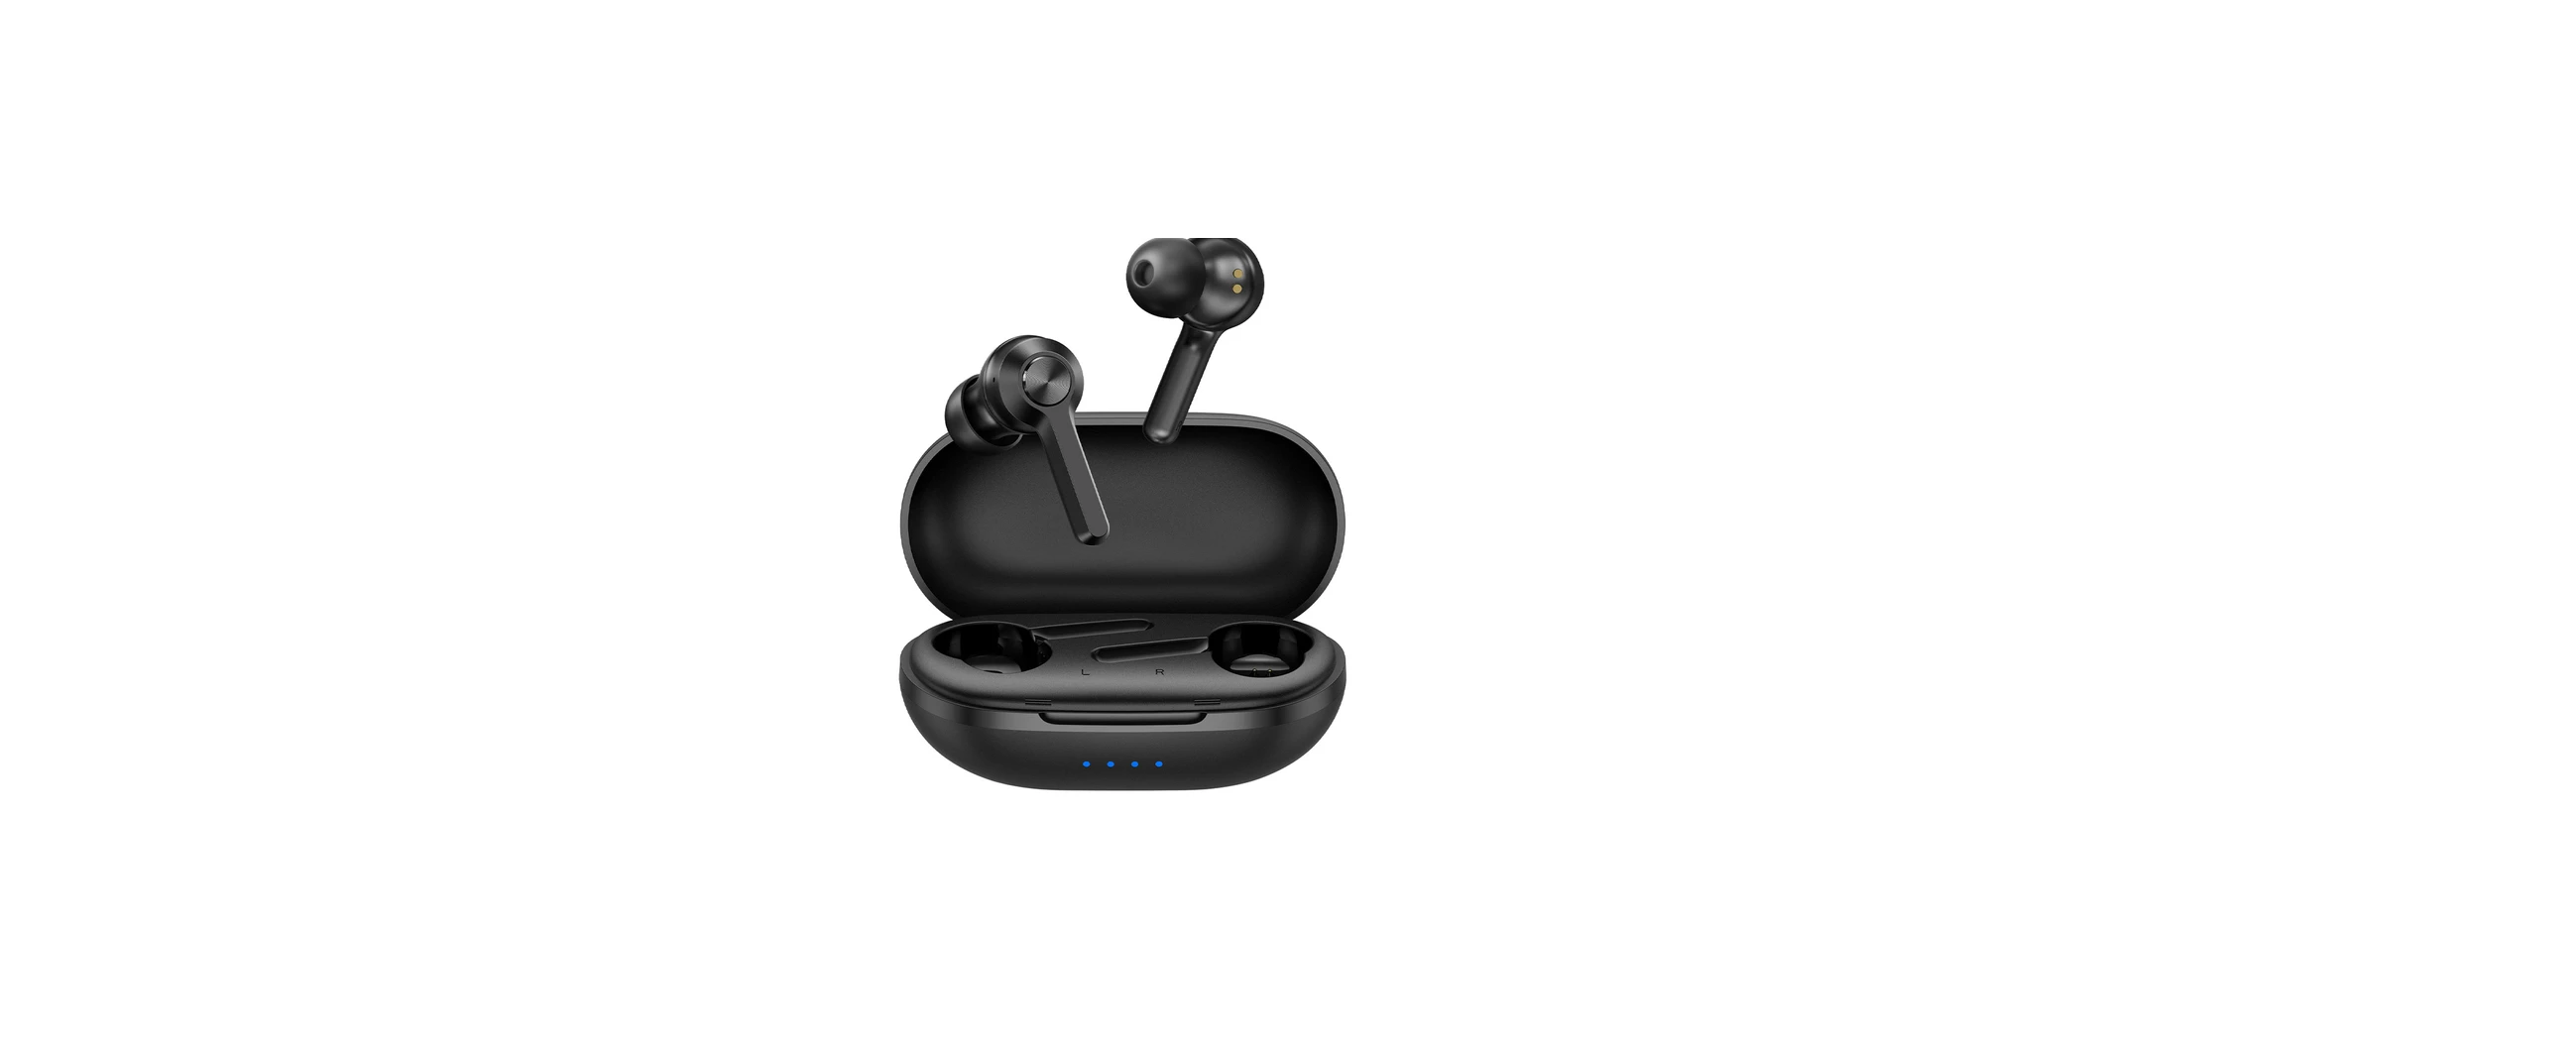 Mpow BH480A MX1 True Wireless Earbuds User Manual featured inmg